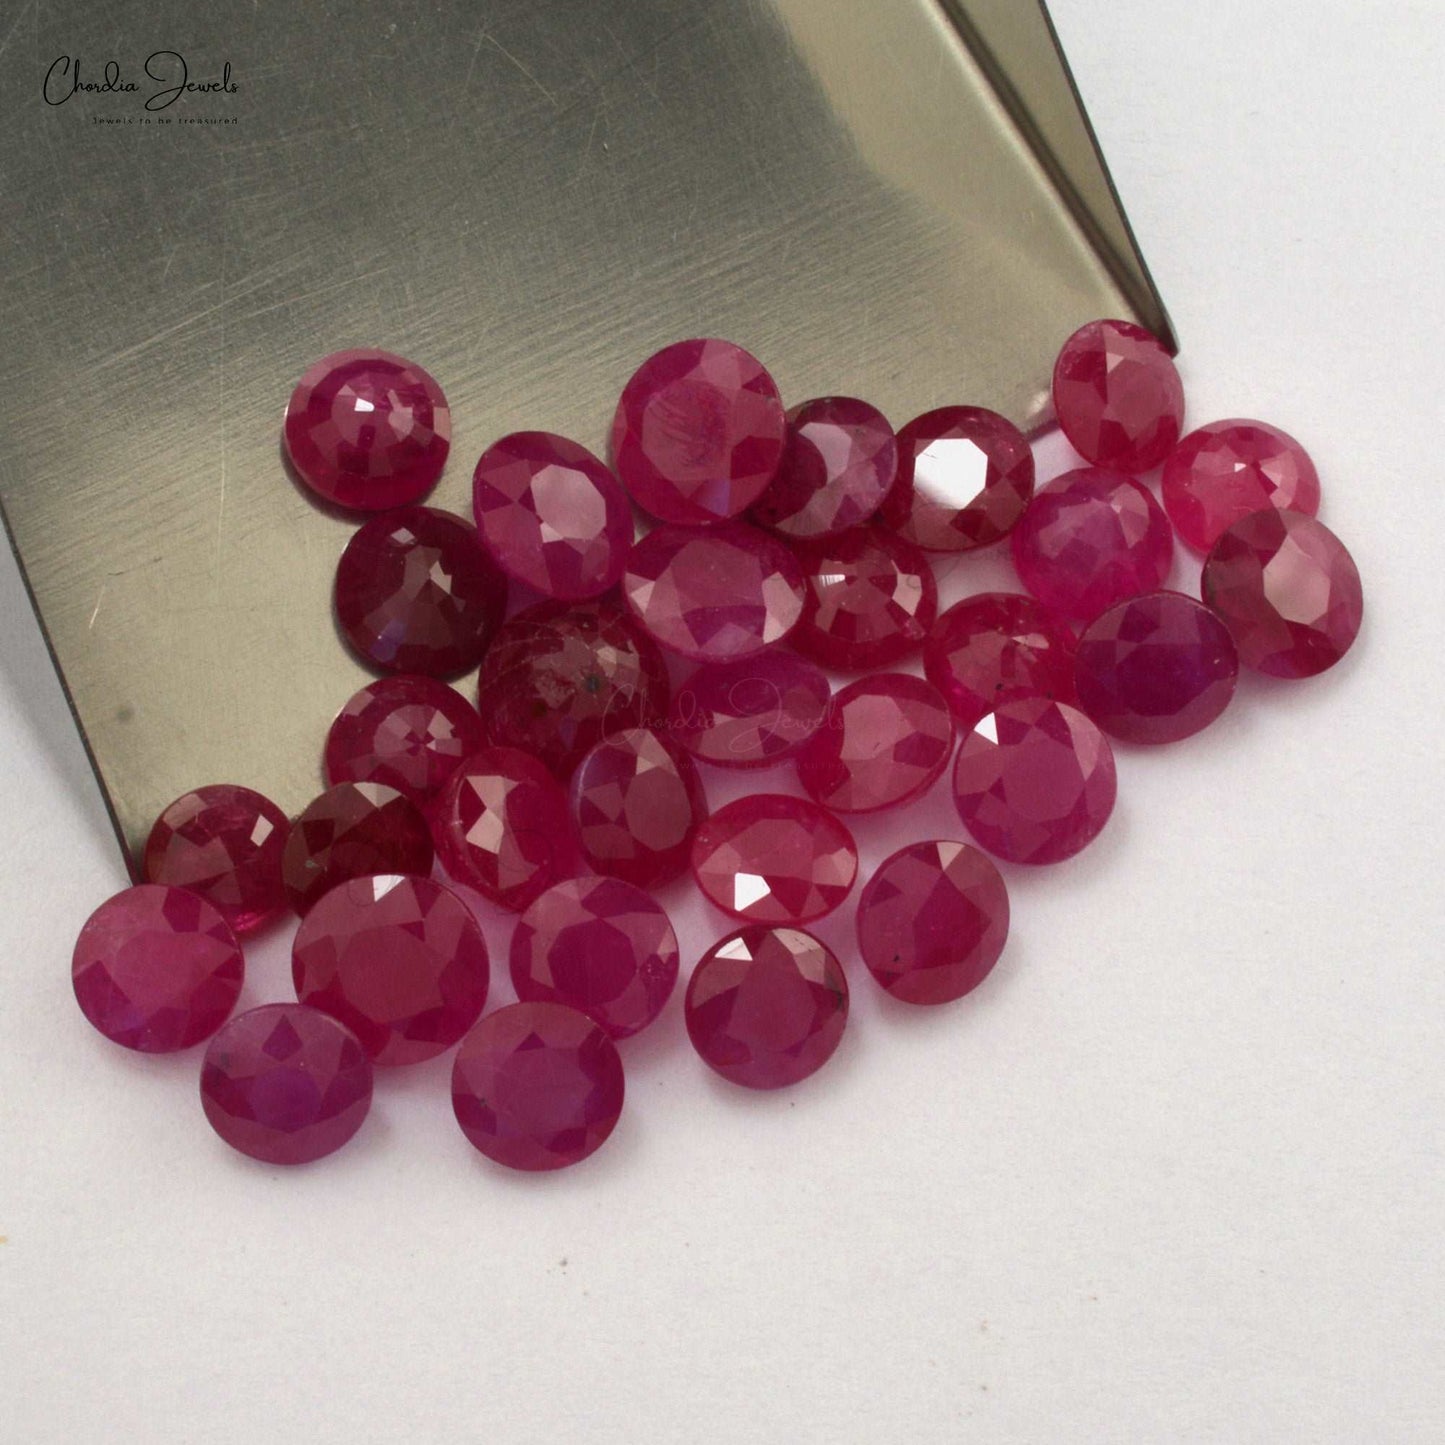 100% Natural Top Quality Ruby 3.50 mm Round Cut, 1 Piece